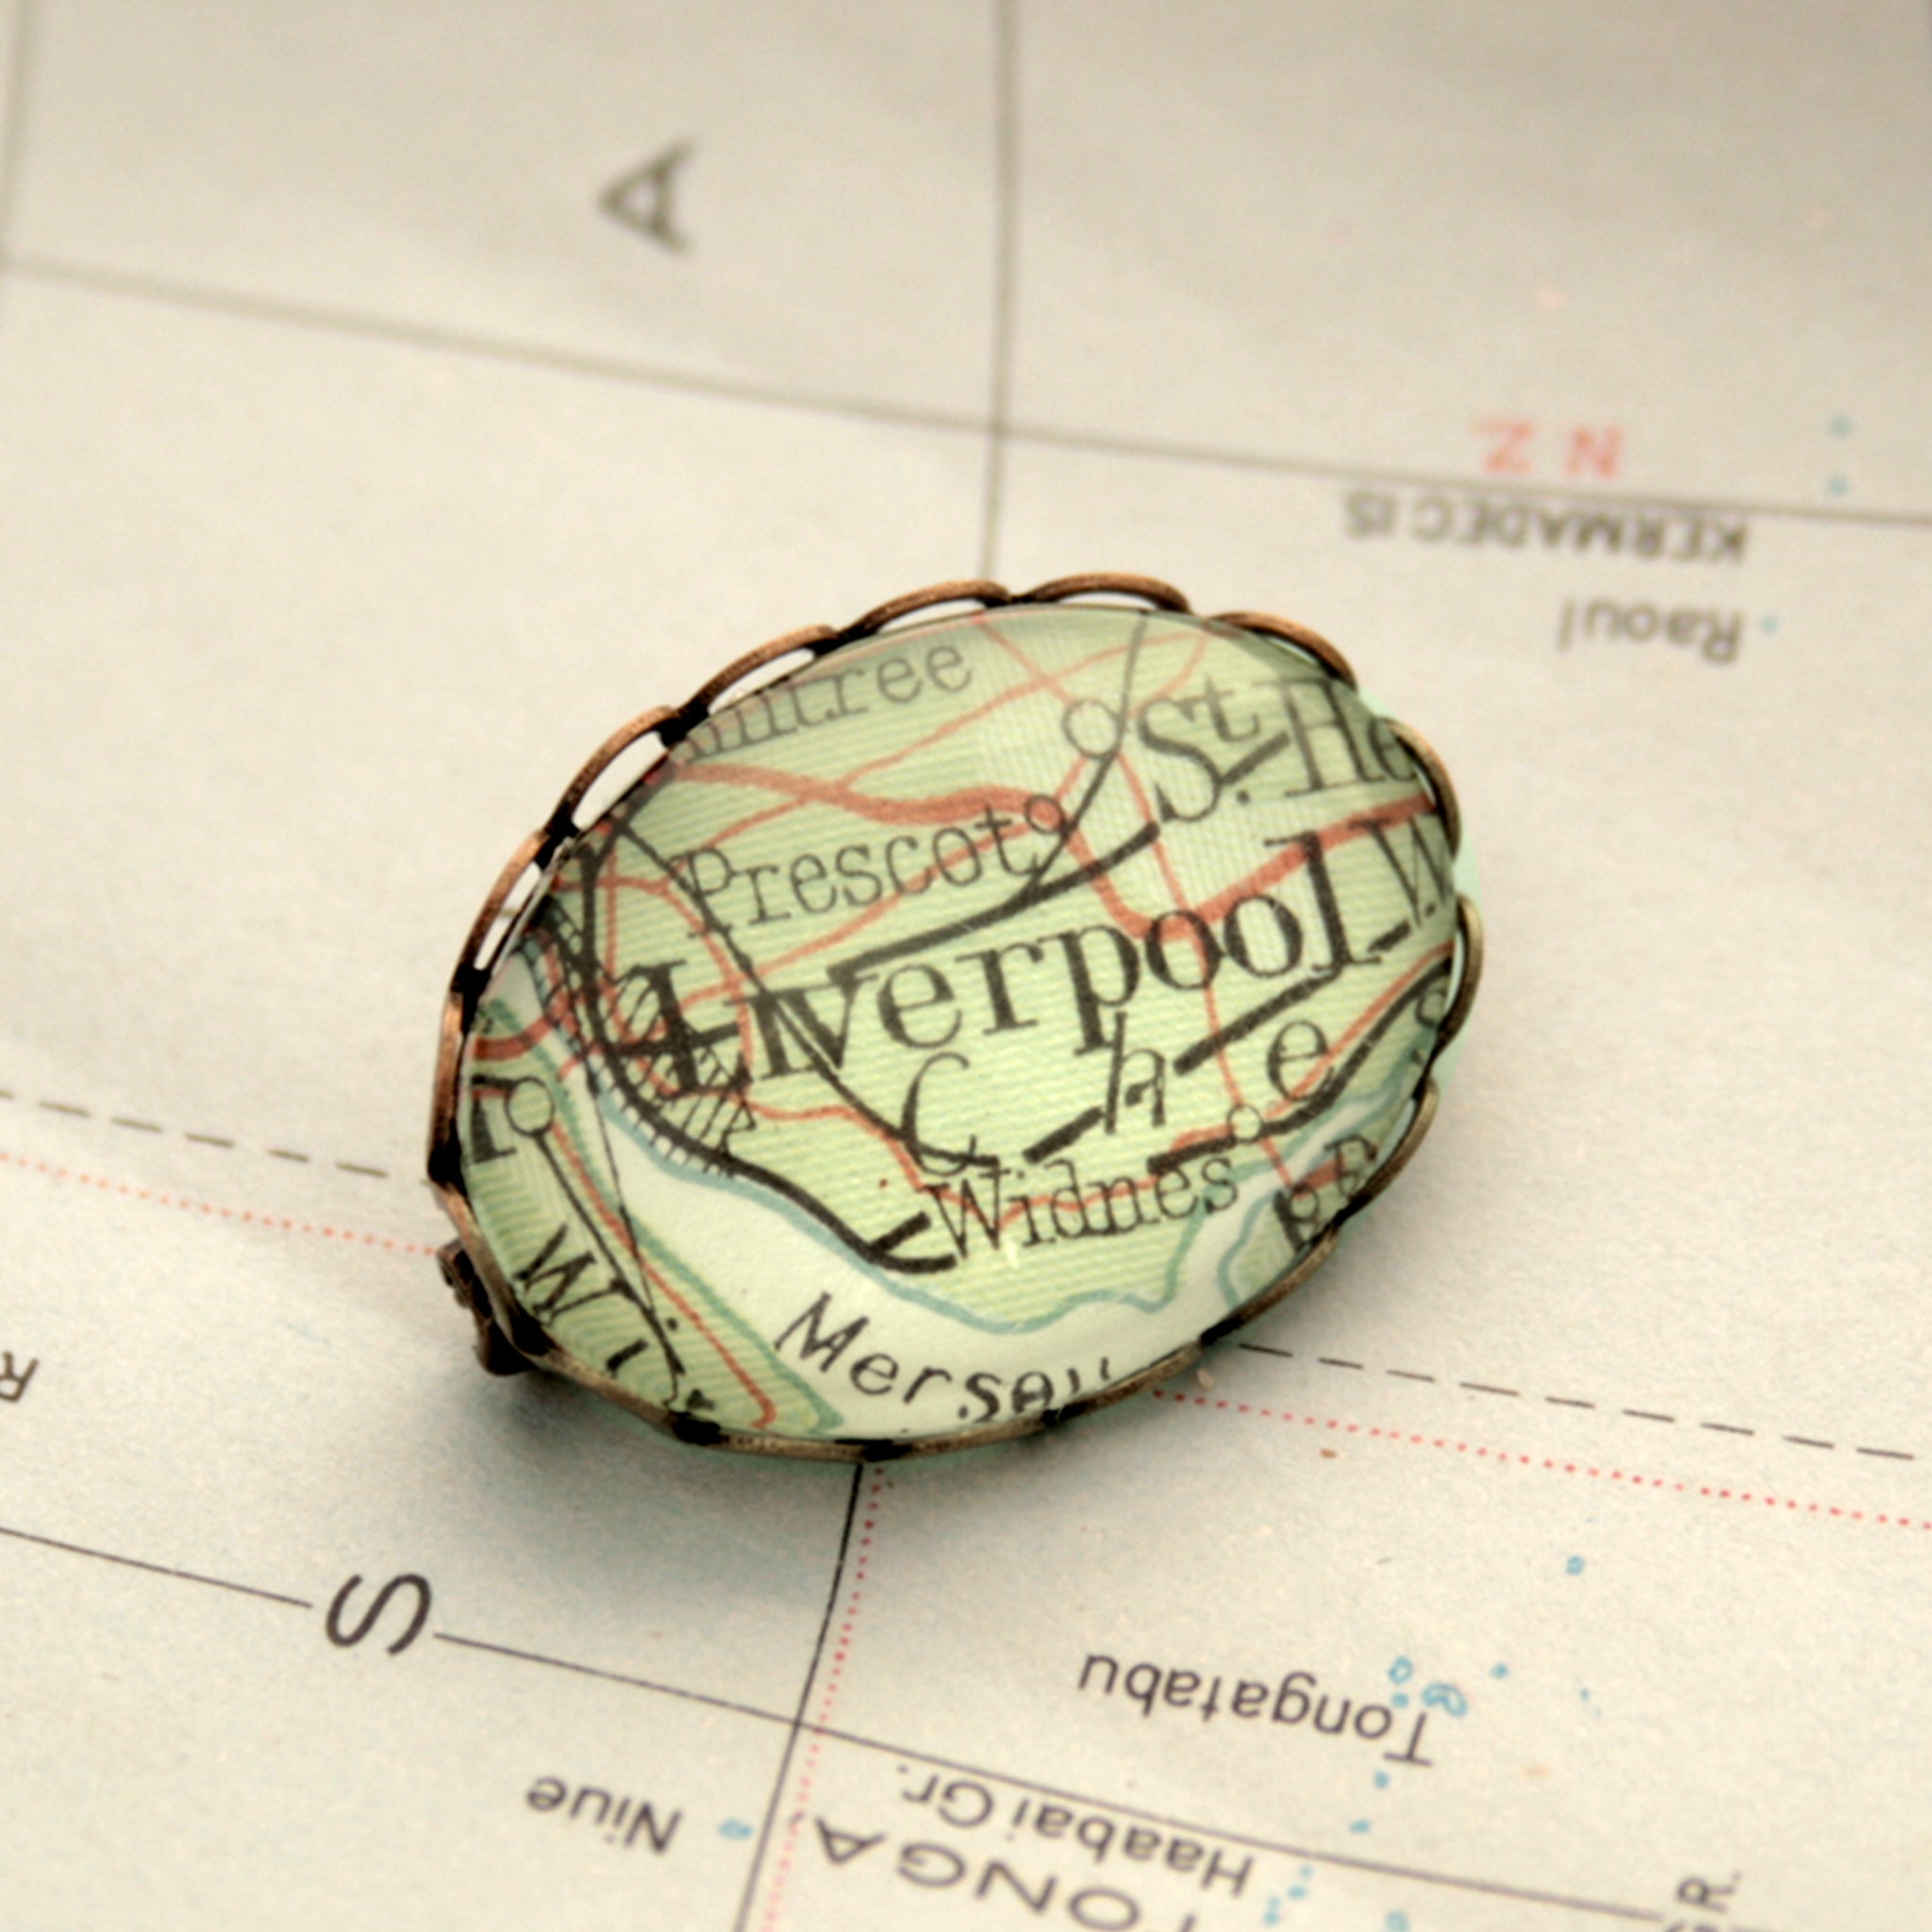 Antique Bronze brooch featuring map of Liverpool